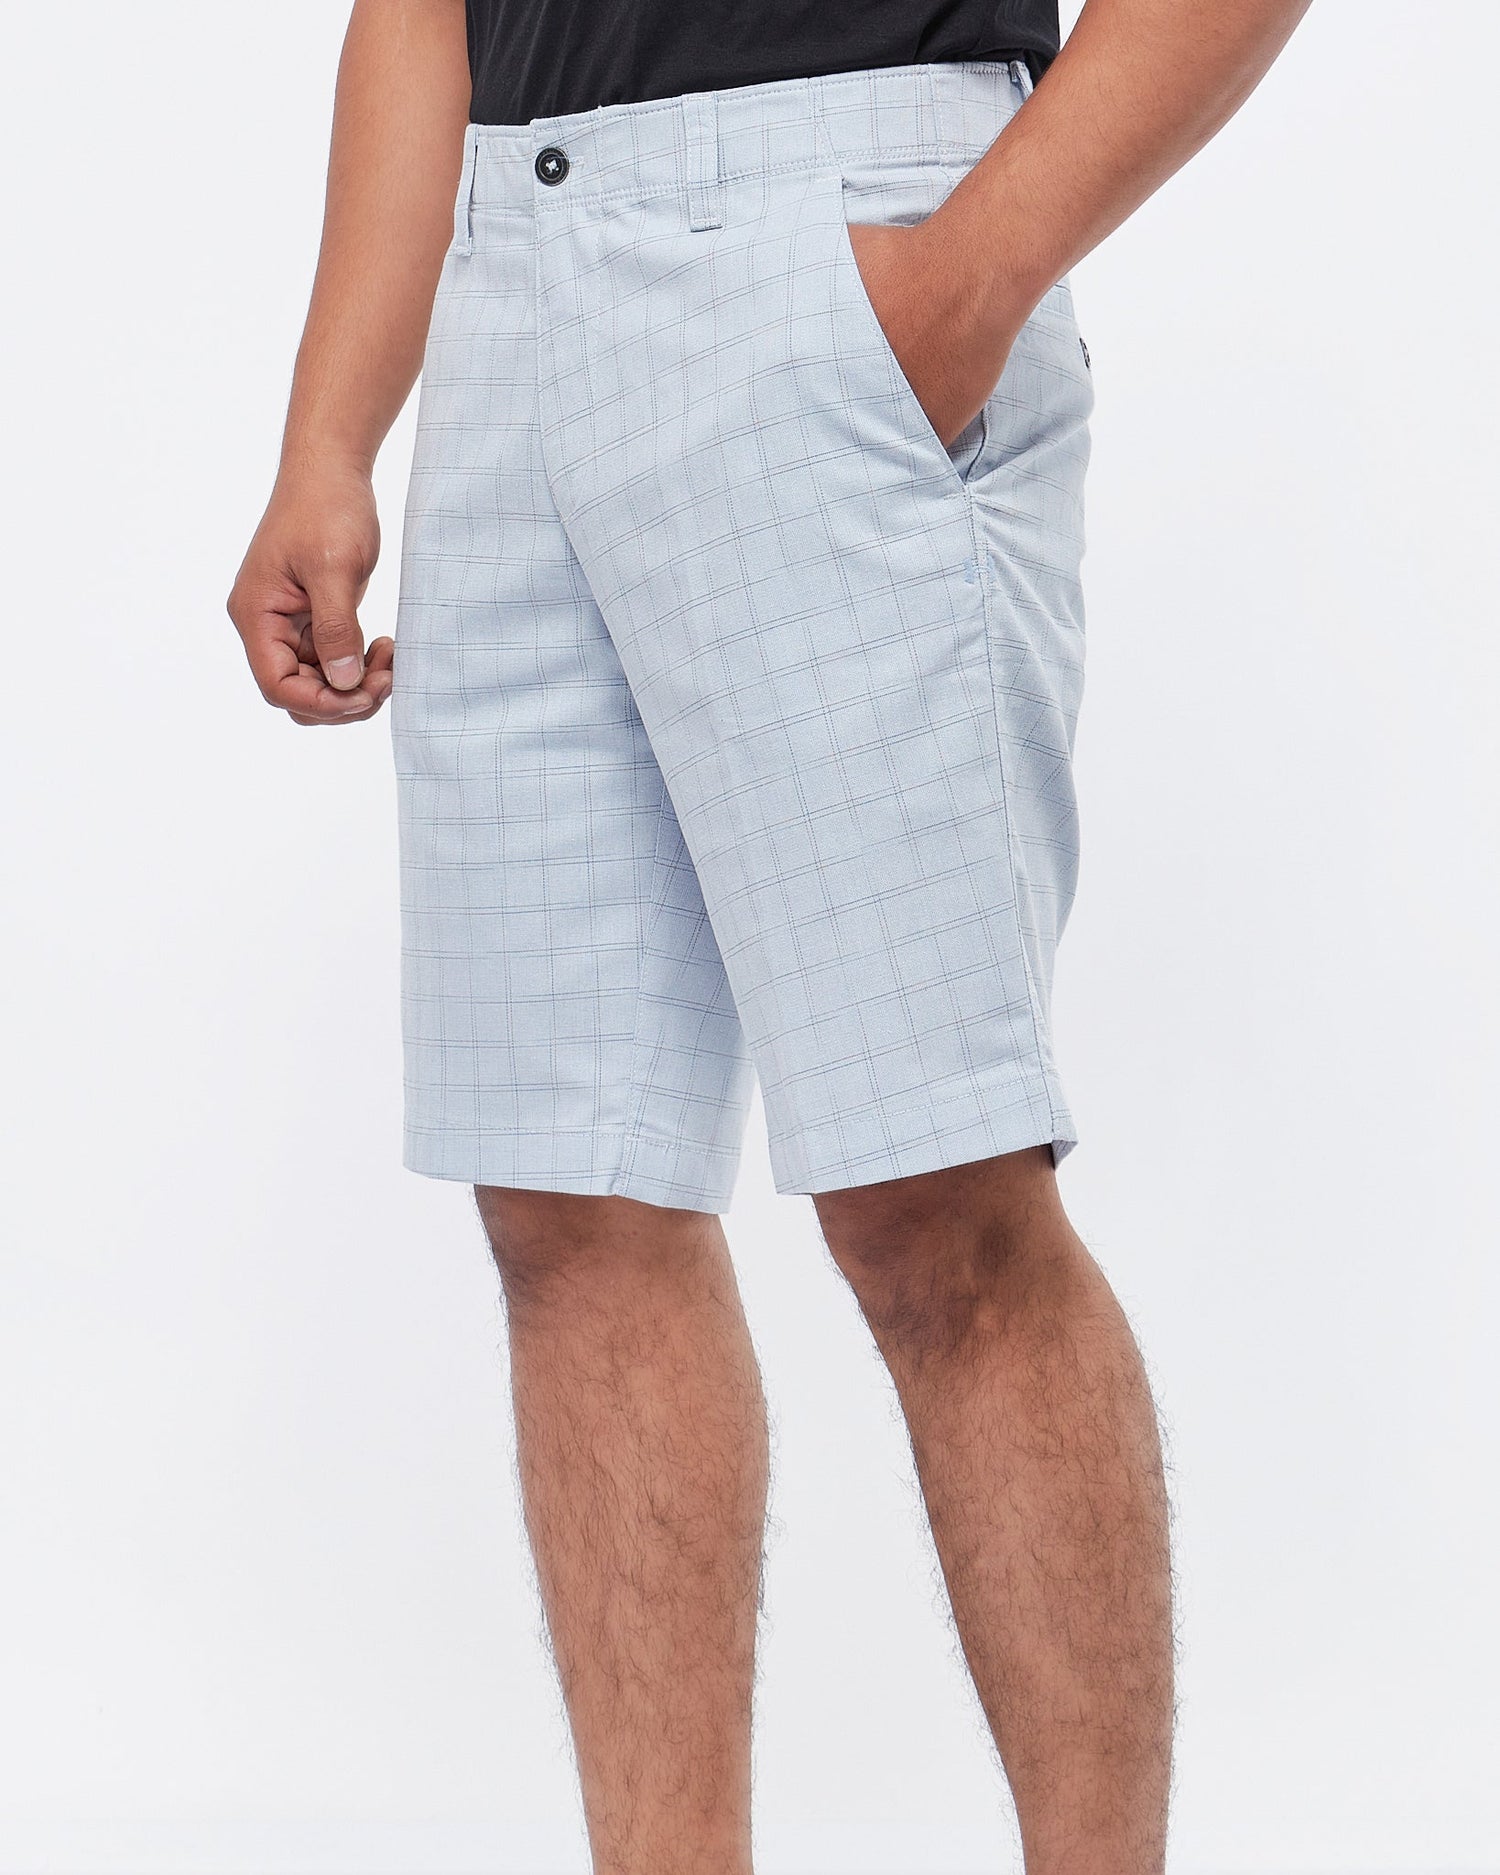 MOI OUTFIT-Checked Pattern Men Short Pants 18.50